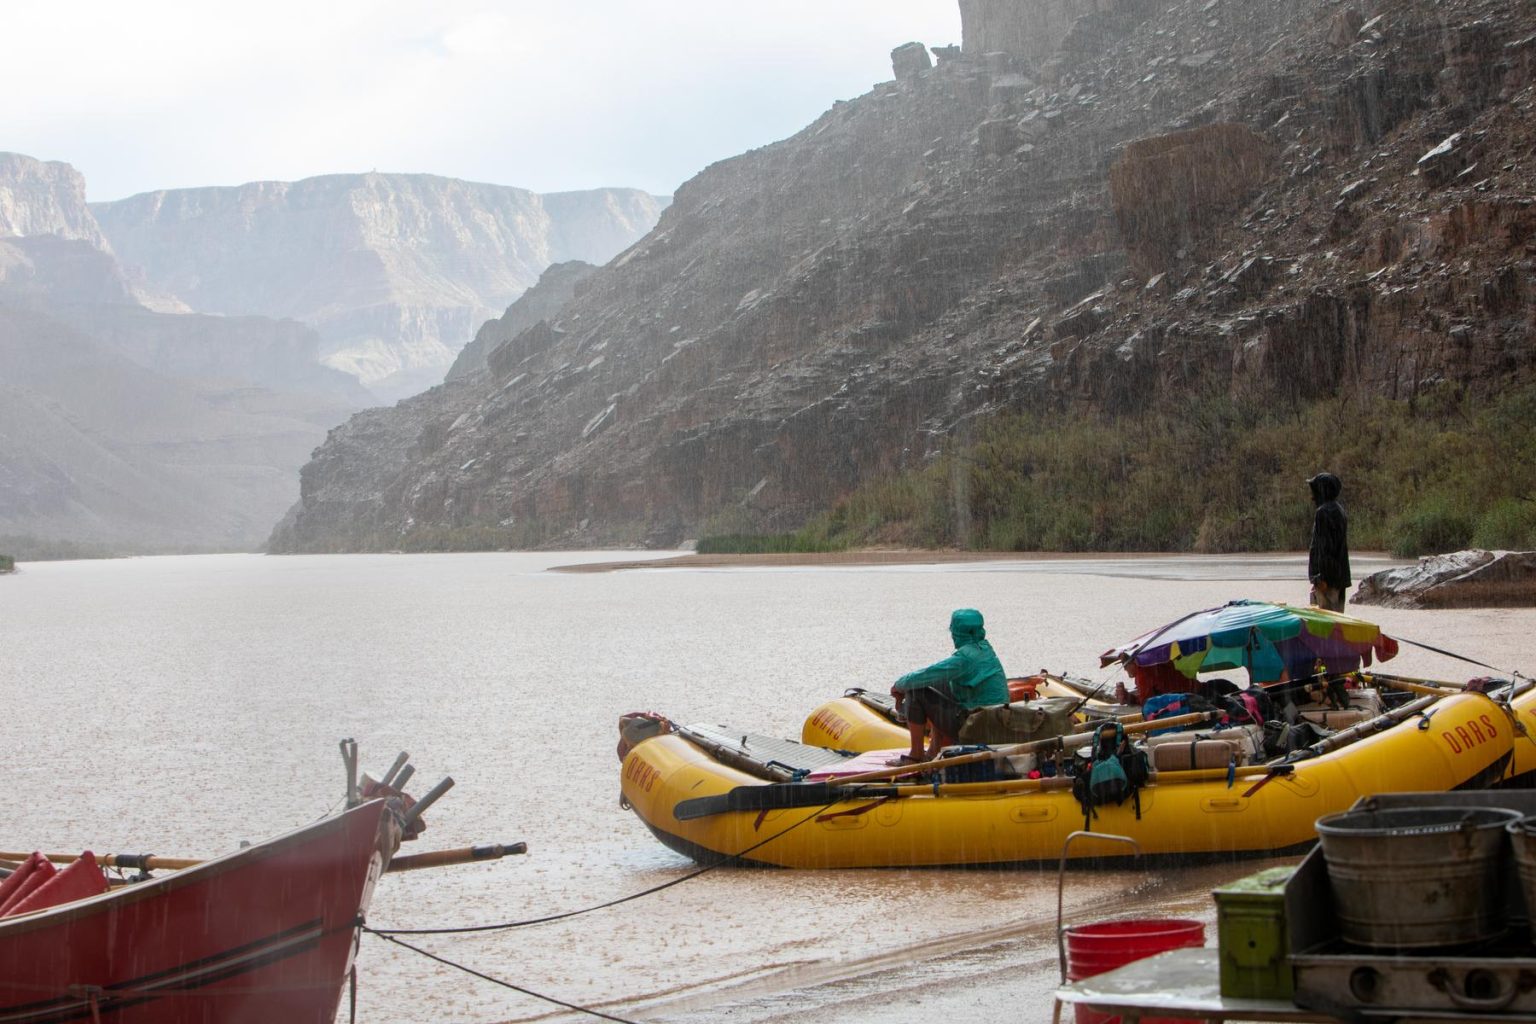 A rainy scene at camp during a Grand Canyon rafting trip with OARS